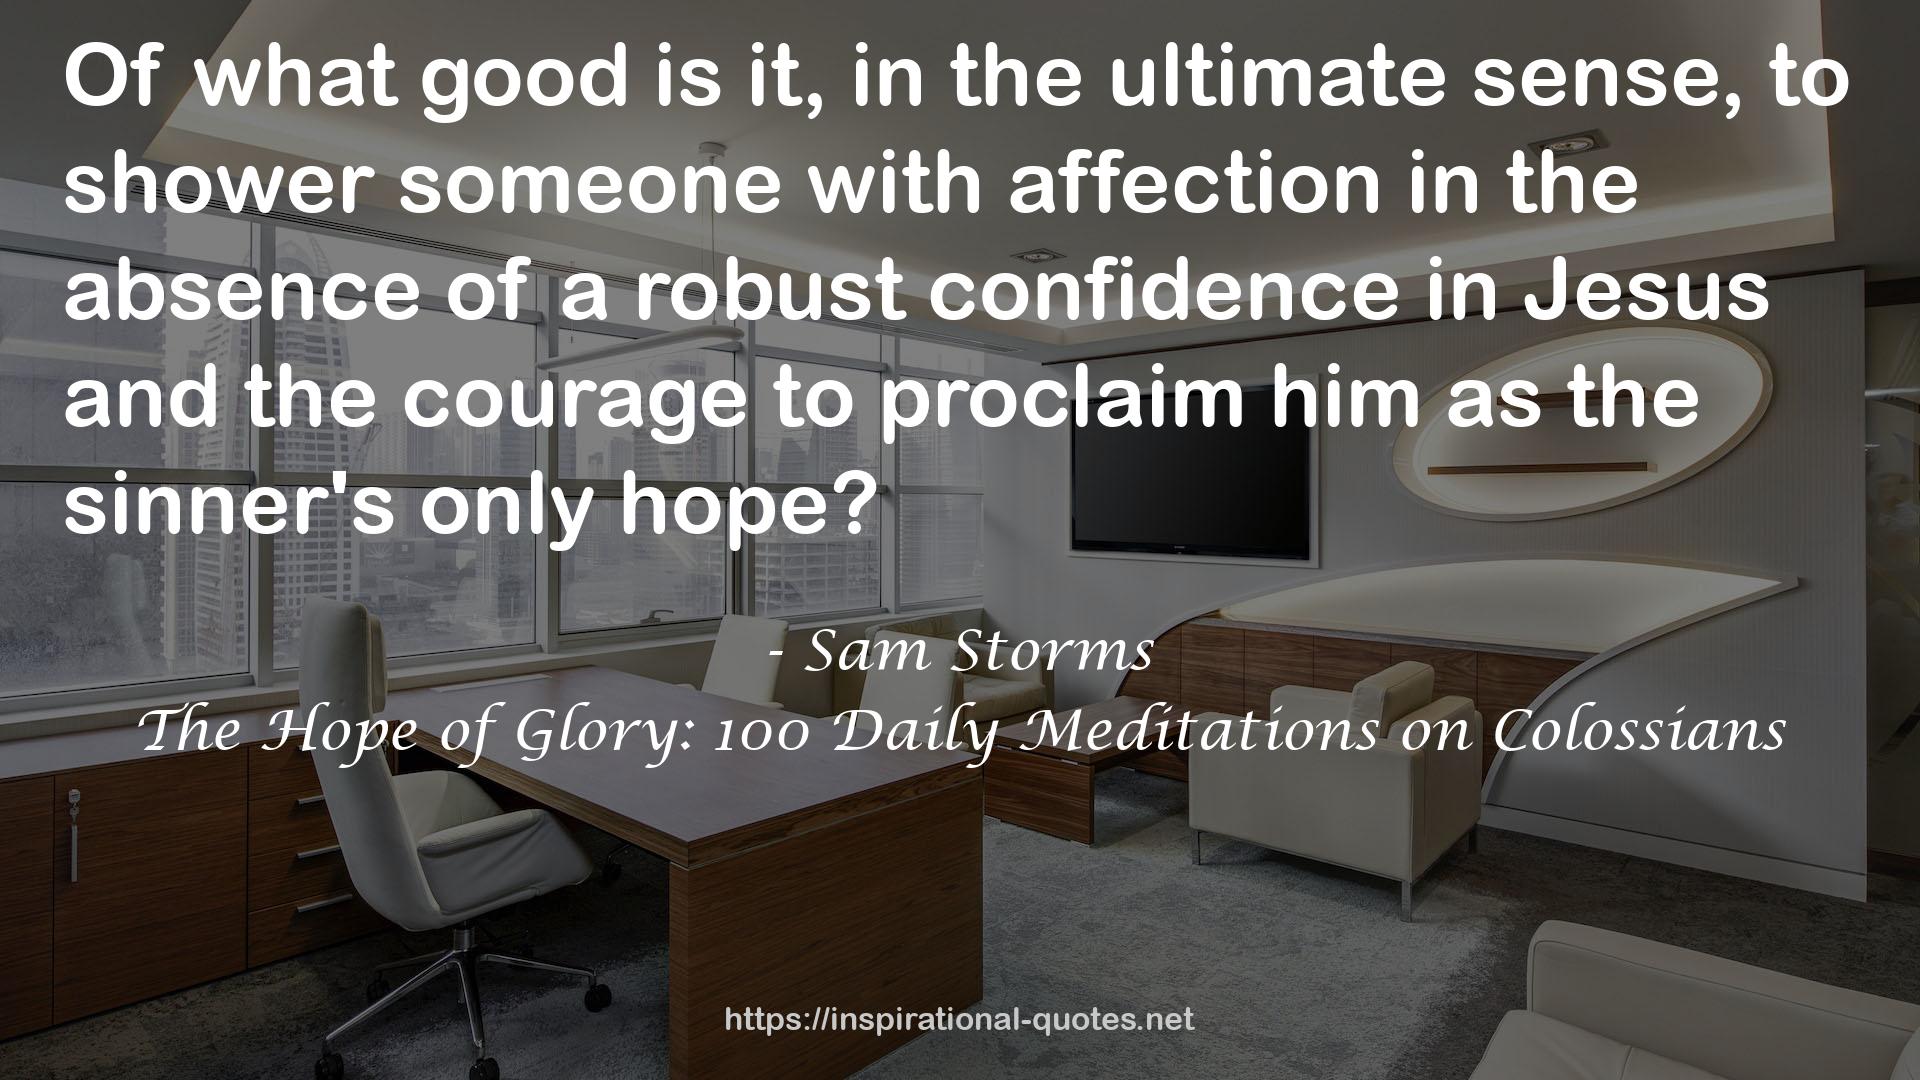 The Hope of Glory: 100 Daily Meditations on Colossians QUOTES